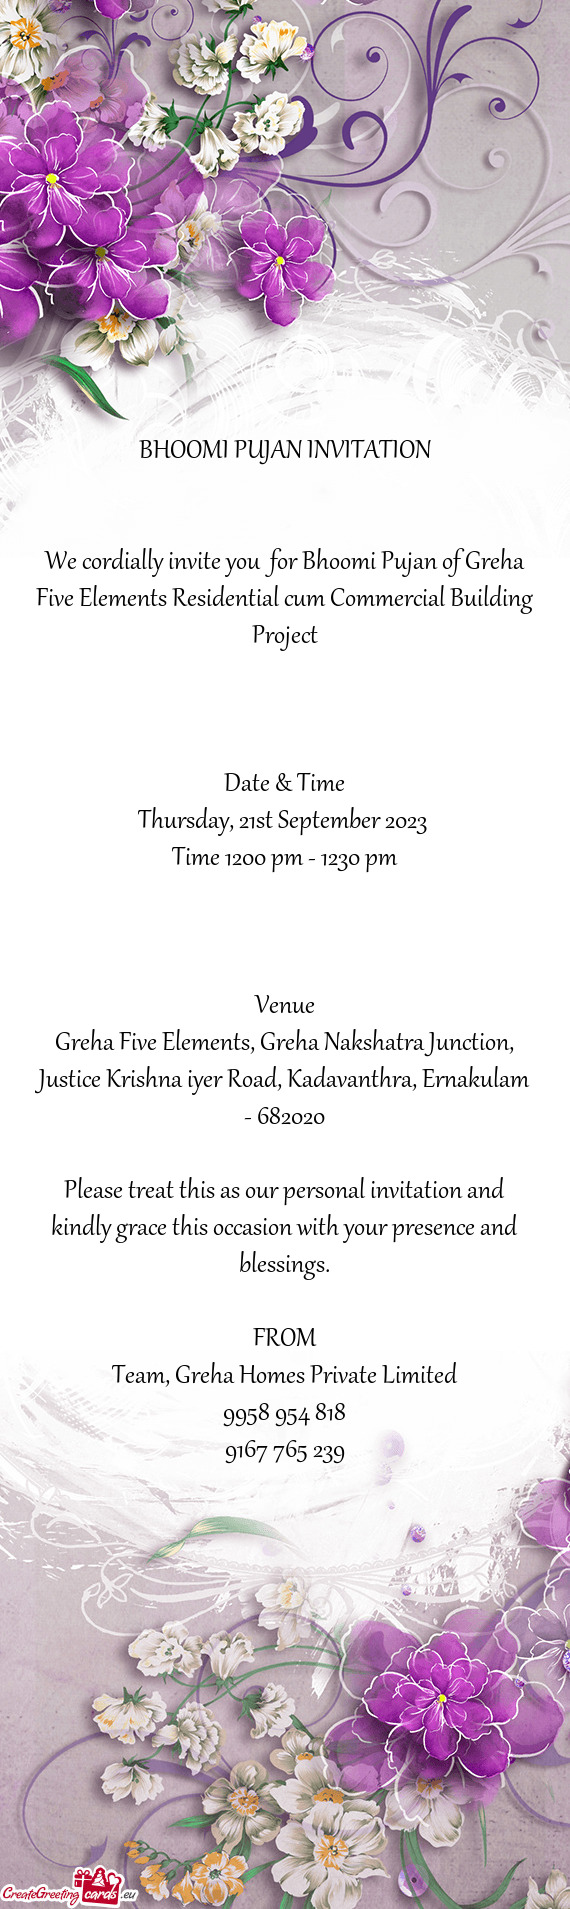 We cordially invite you for Bhoomi Pujan of Greha Five Elements Residential cum Commercial Building